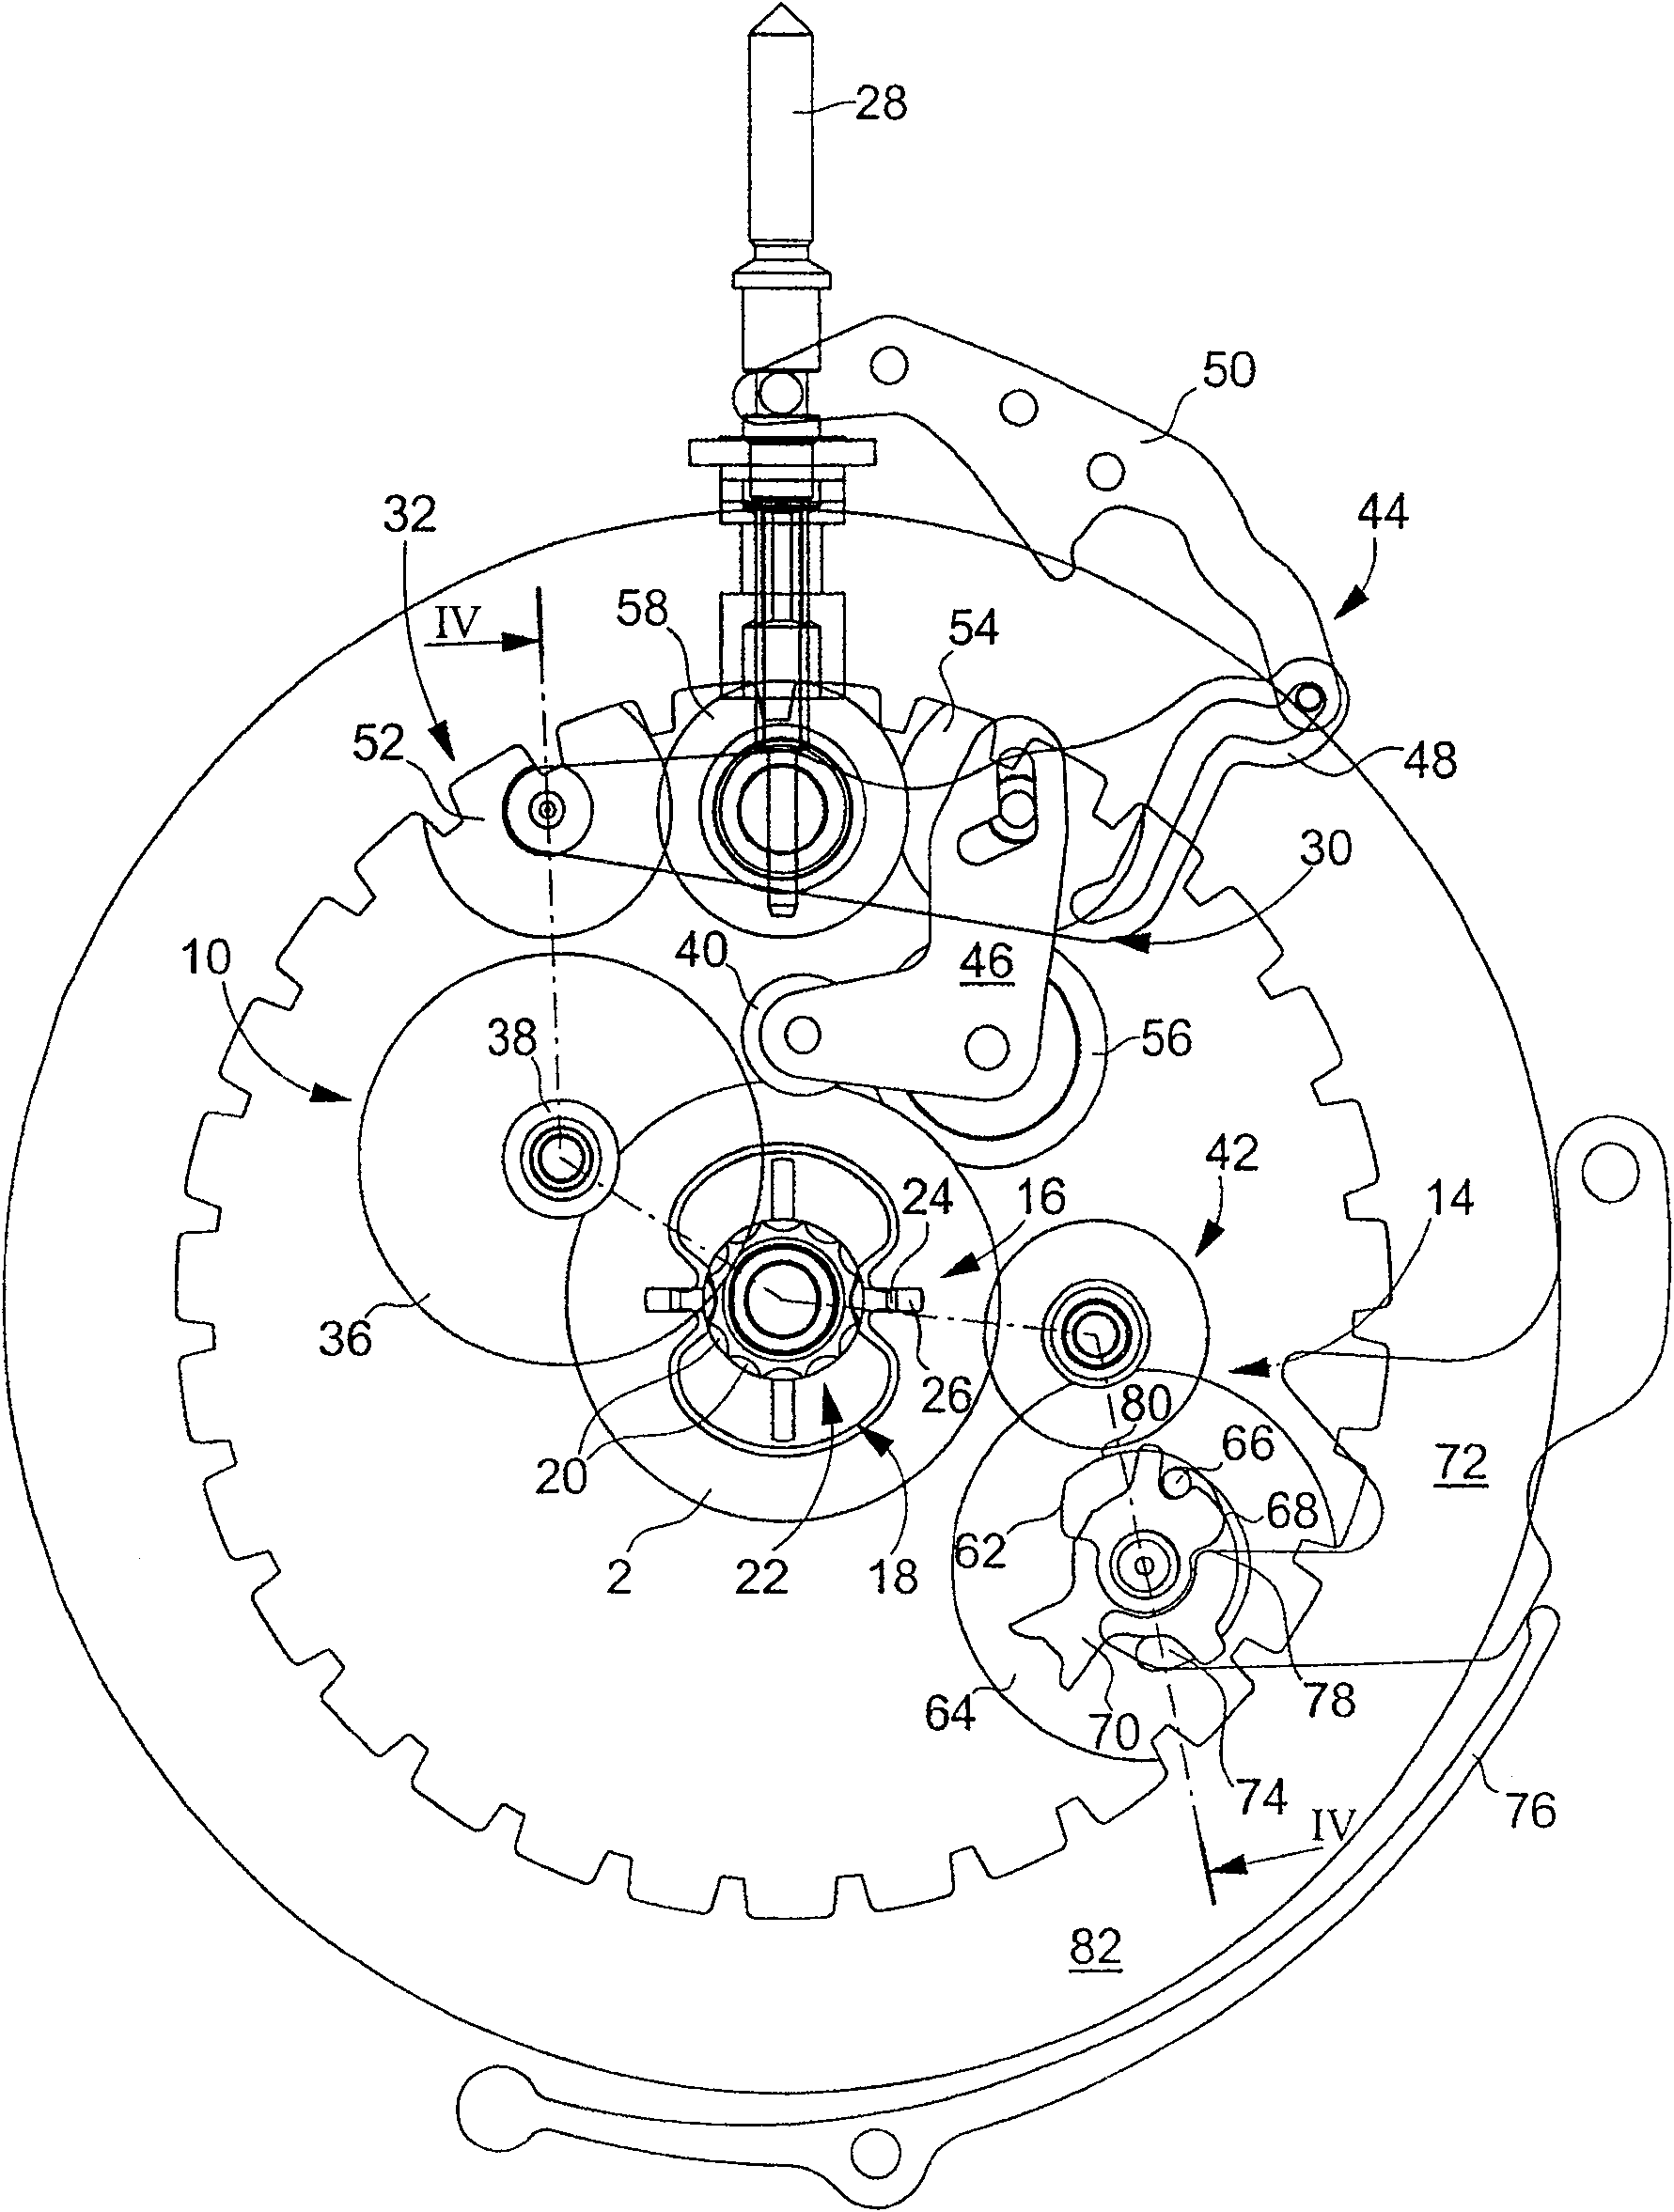 Timepiece with an hour hand able to be moved forward or backward by one hour step